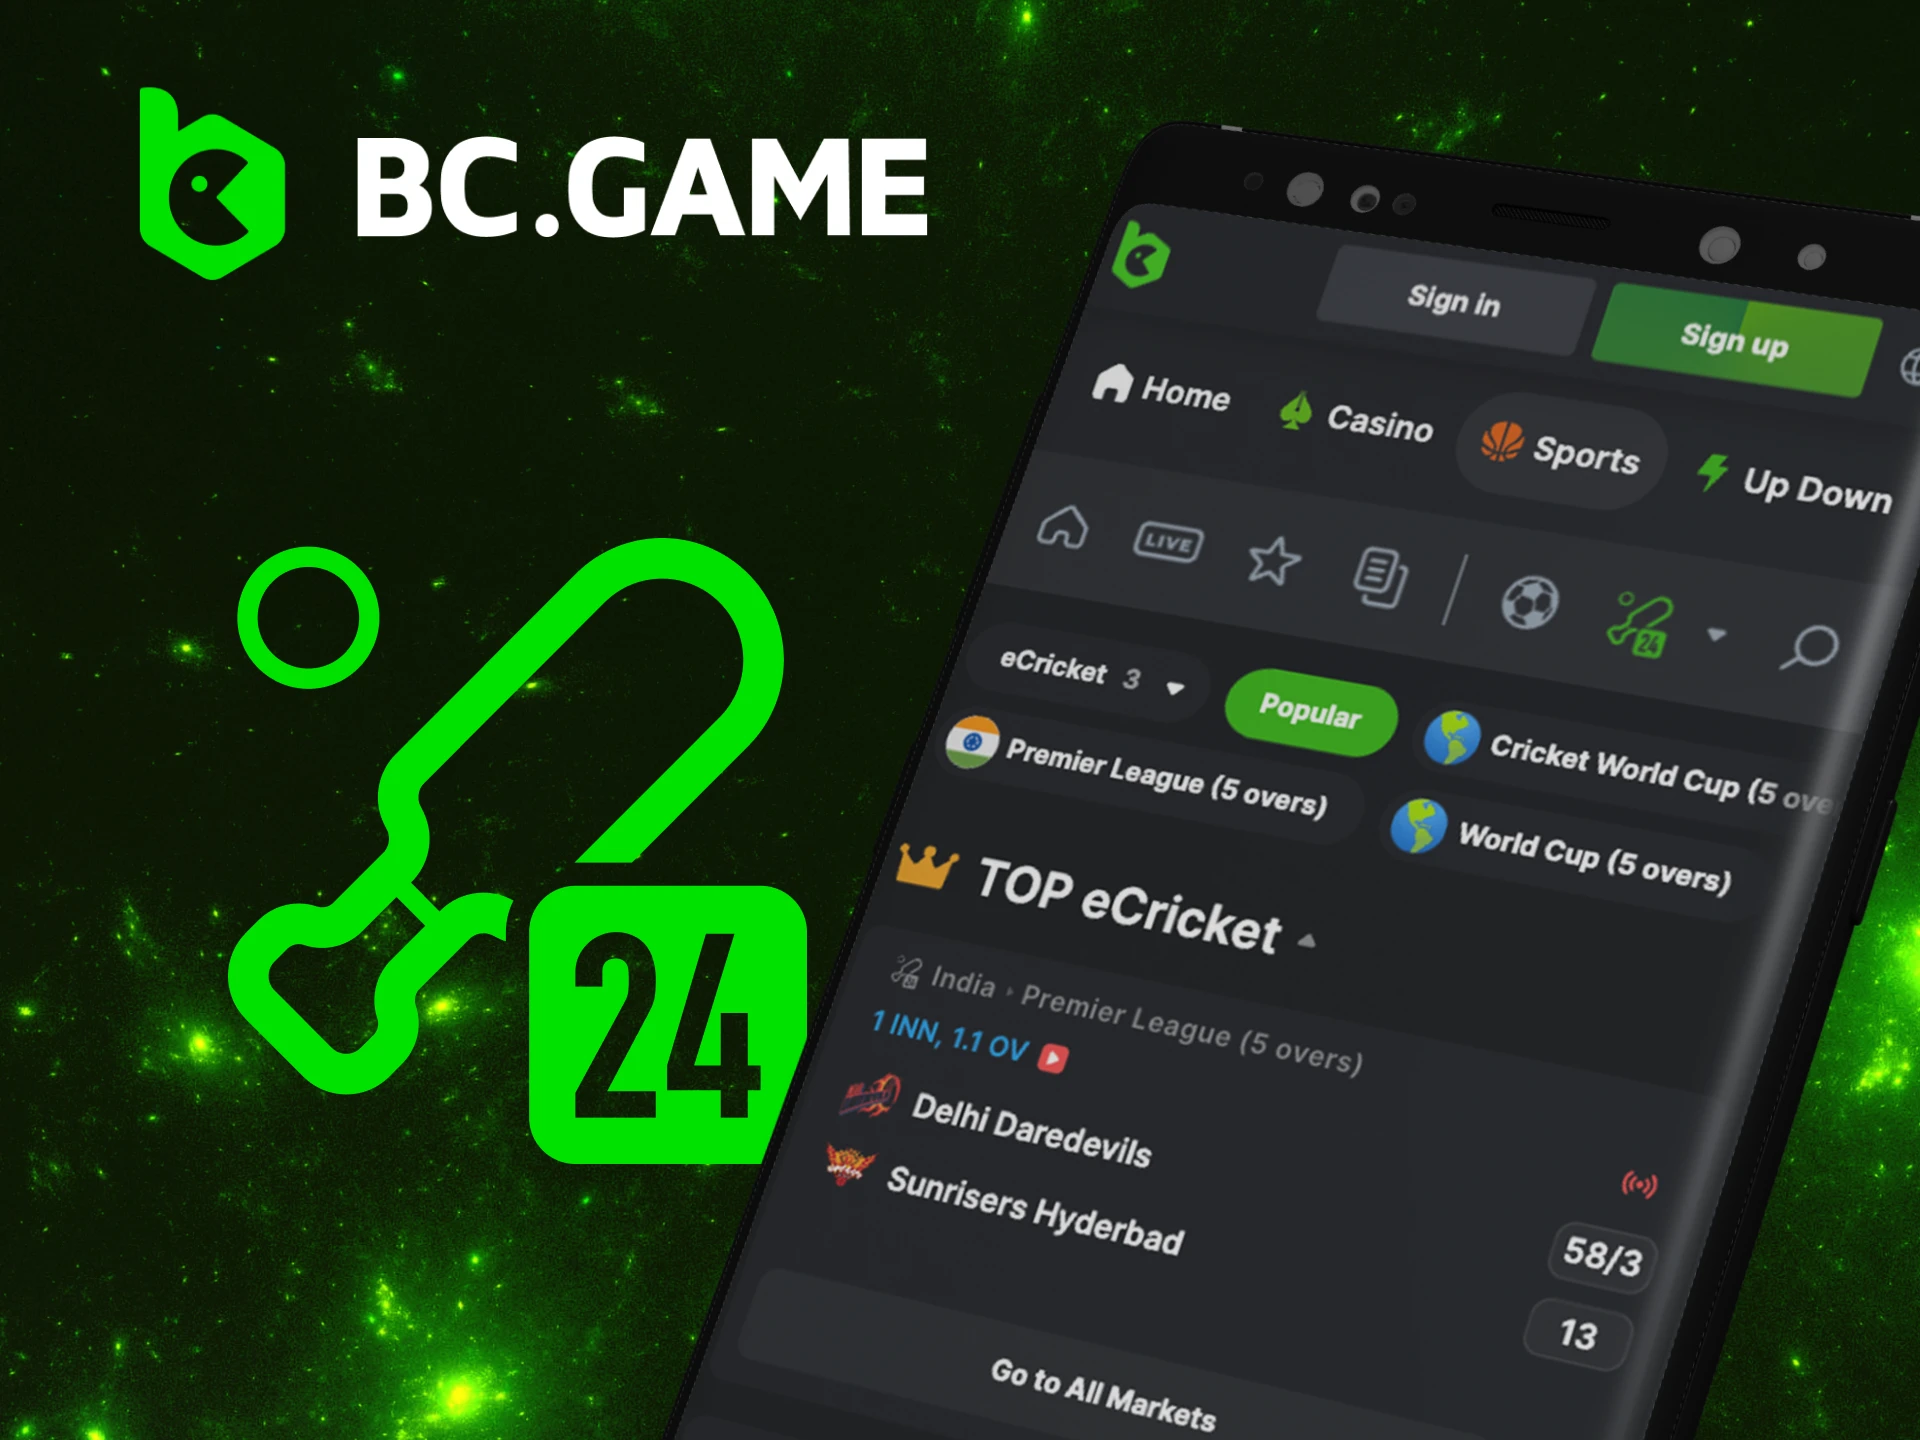 What are the most popular cricket events on the BC Game website.